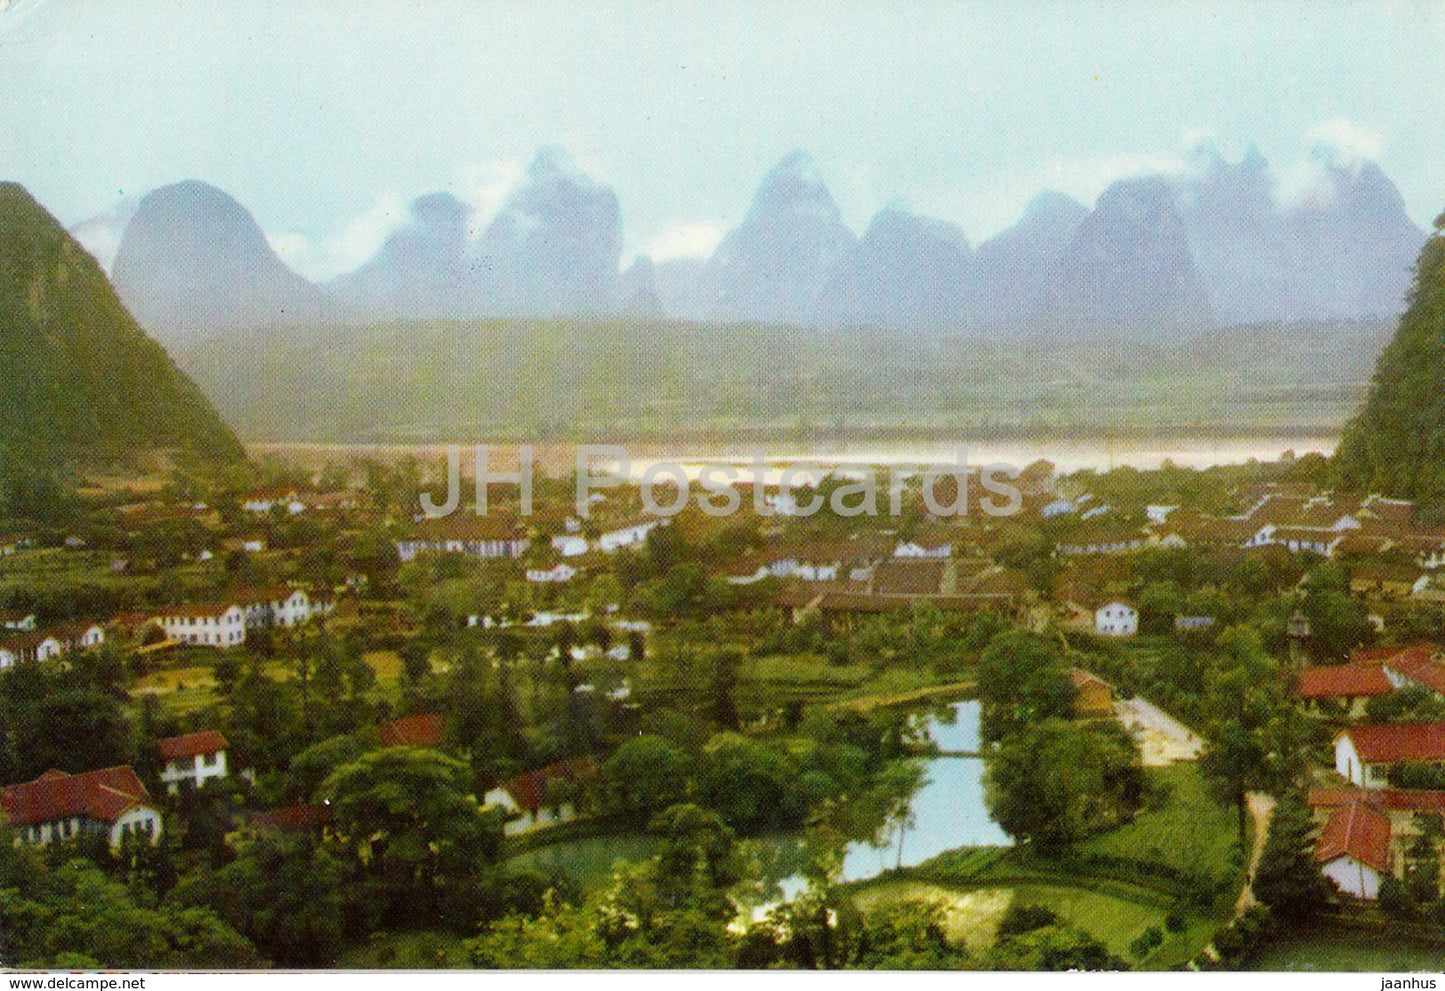 Kweilin - Guilin - Yangshuo in a drizzle - 1973 - China - unused